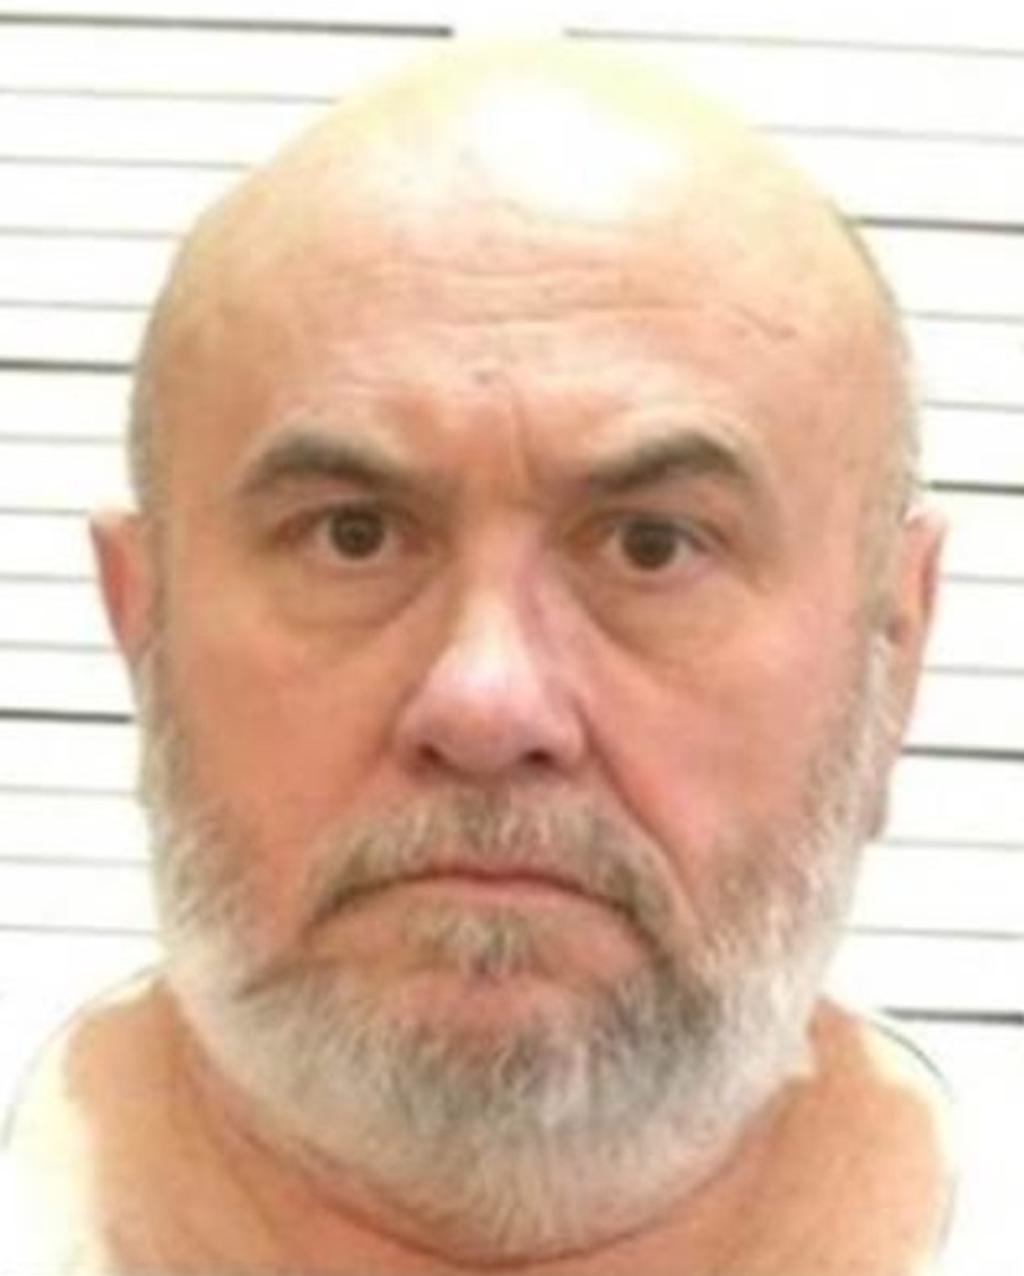 Governor Rejects Jurors’ Plea for Clemency for Edmund Zagorski as Tennessee Court Allows Lethal Injections to Proceed